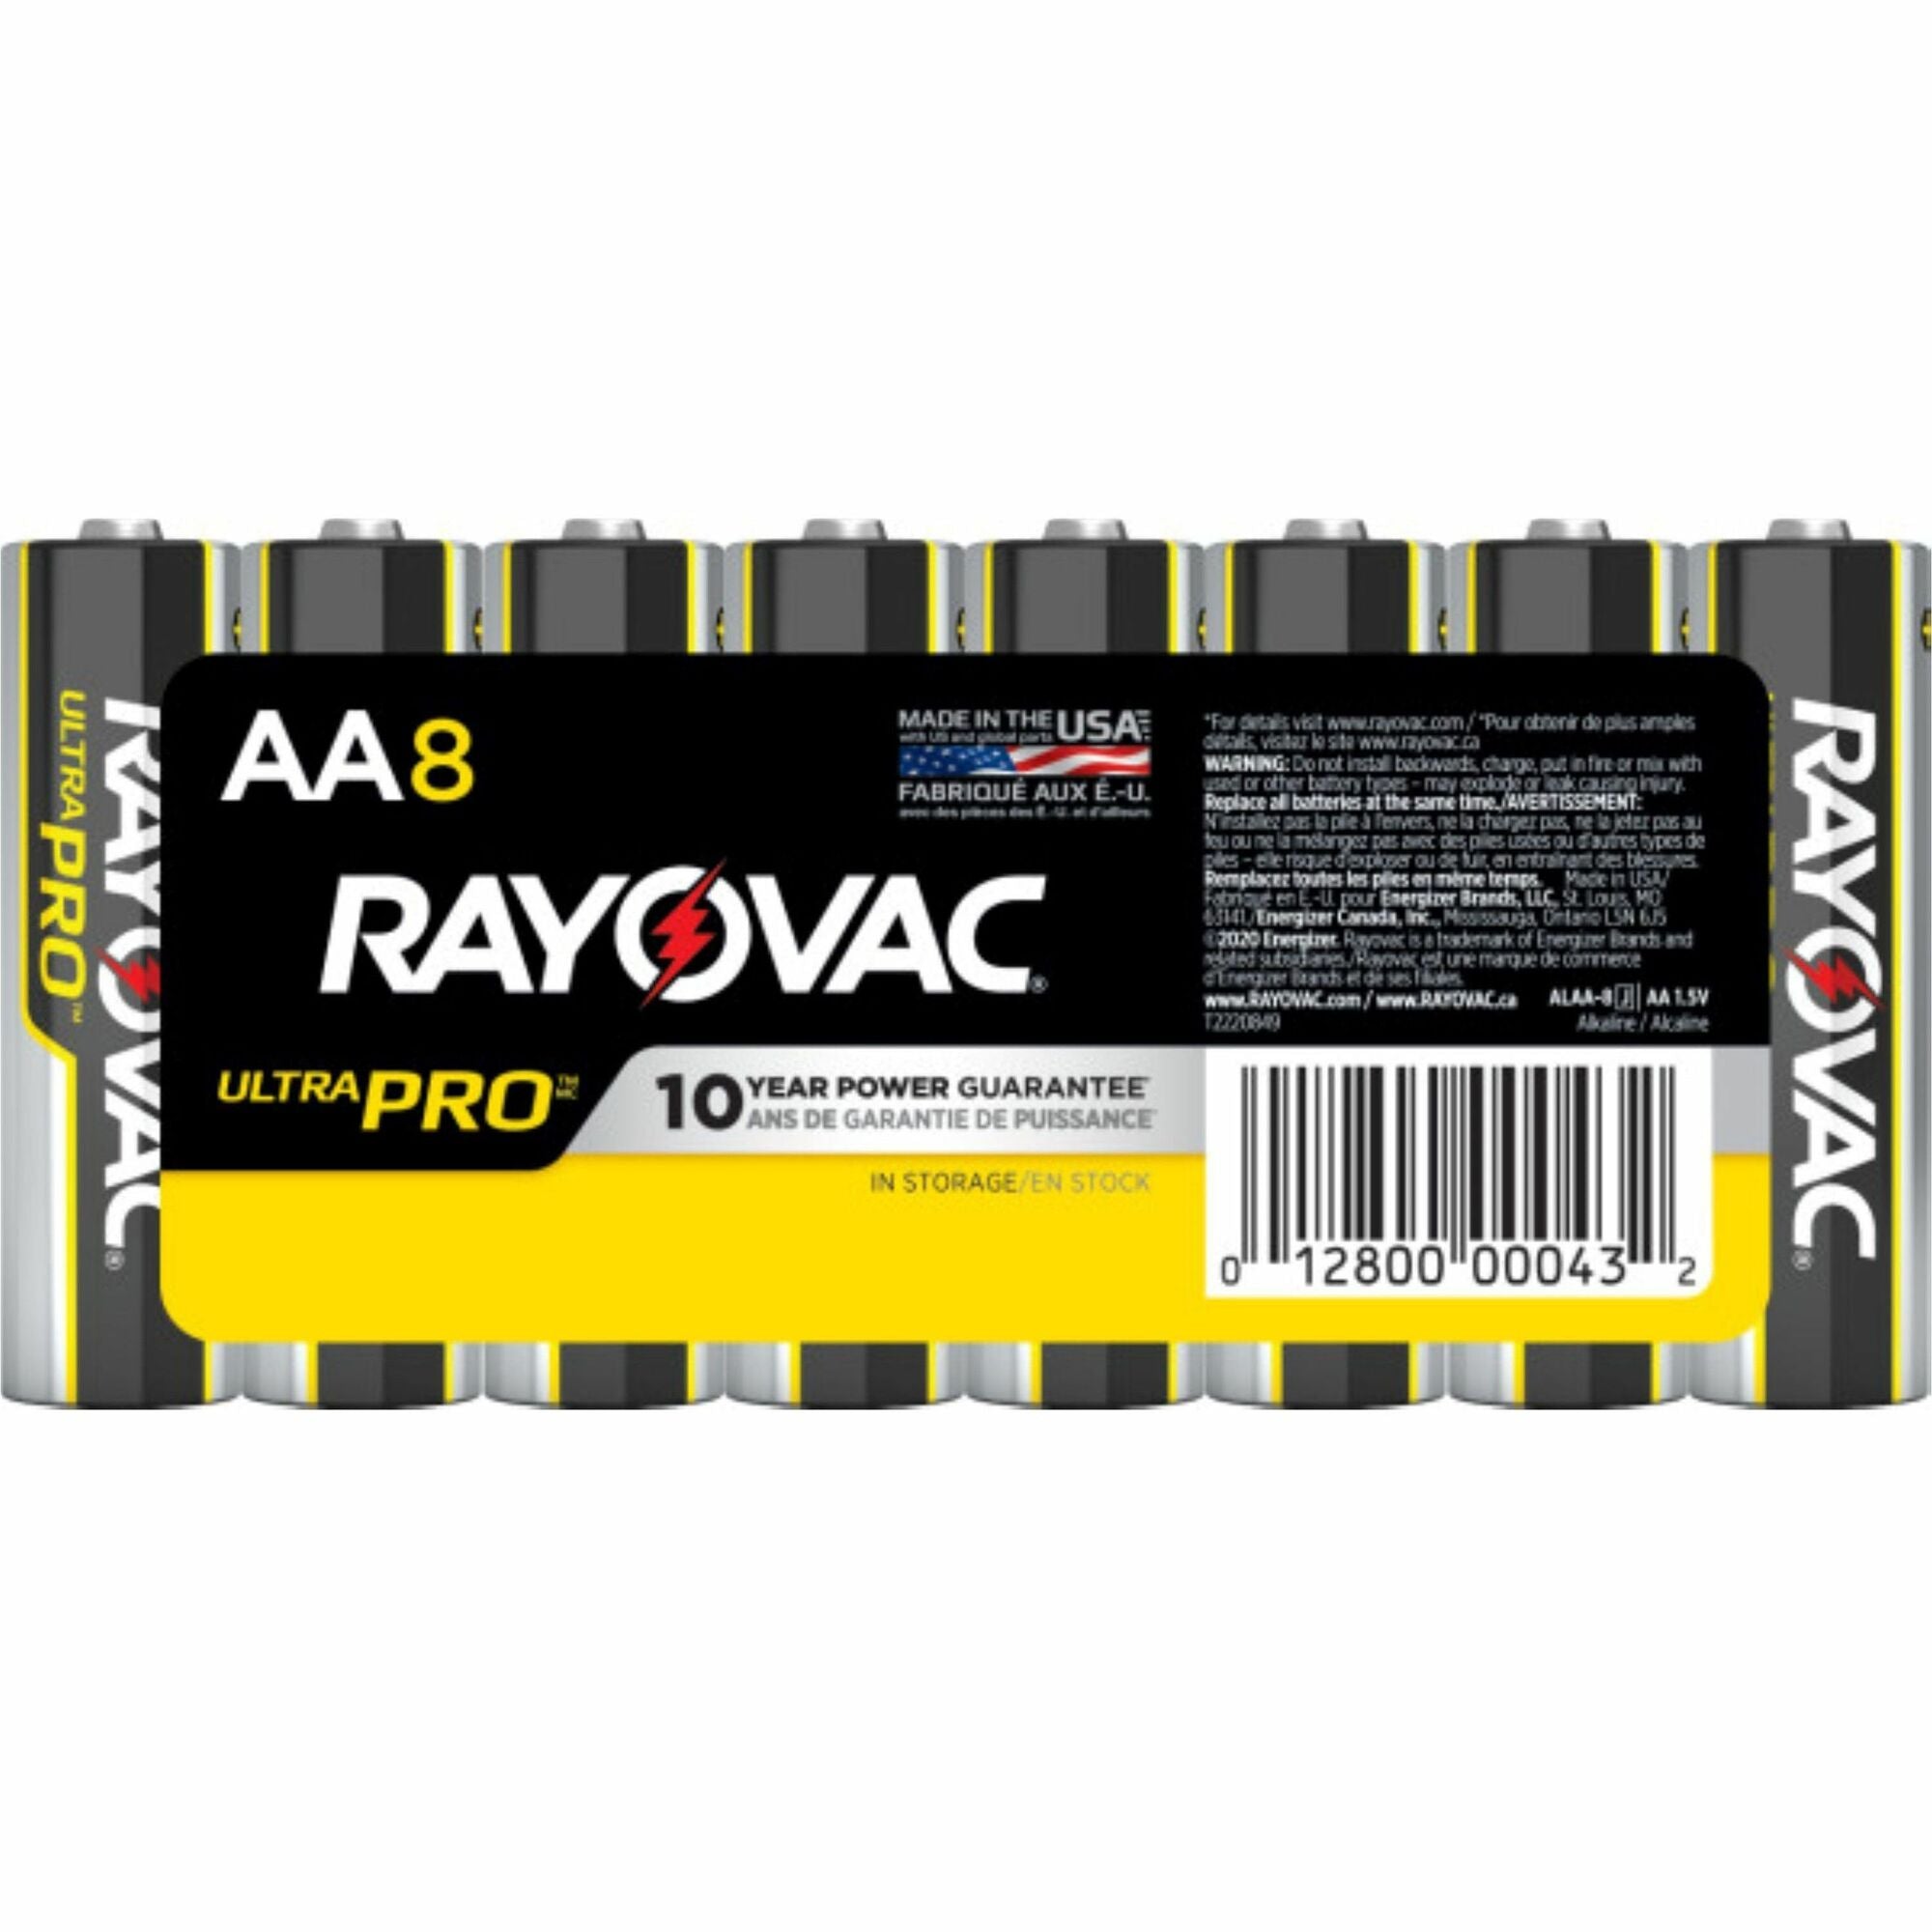 Rayovac Ultra Pro Alkaline AA Batteries - For Multipurpose - AA - 1.5 V DC - 8 / Pack - 1